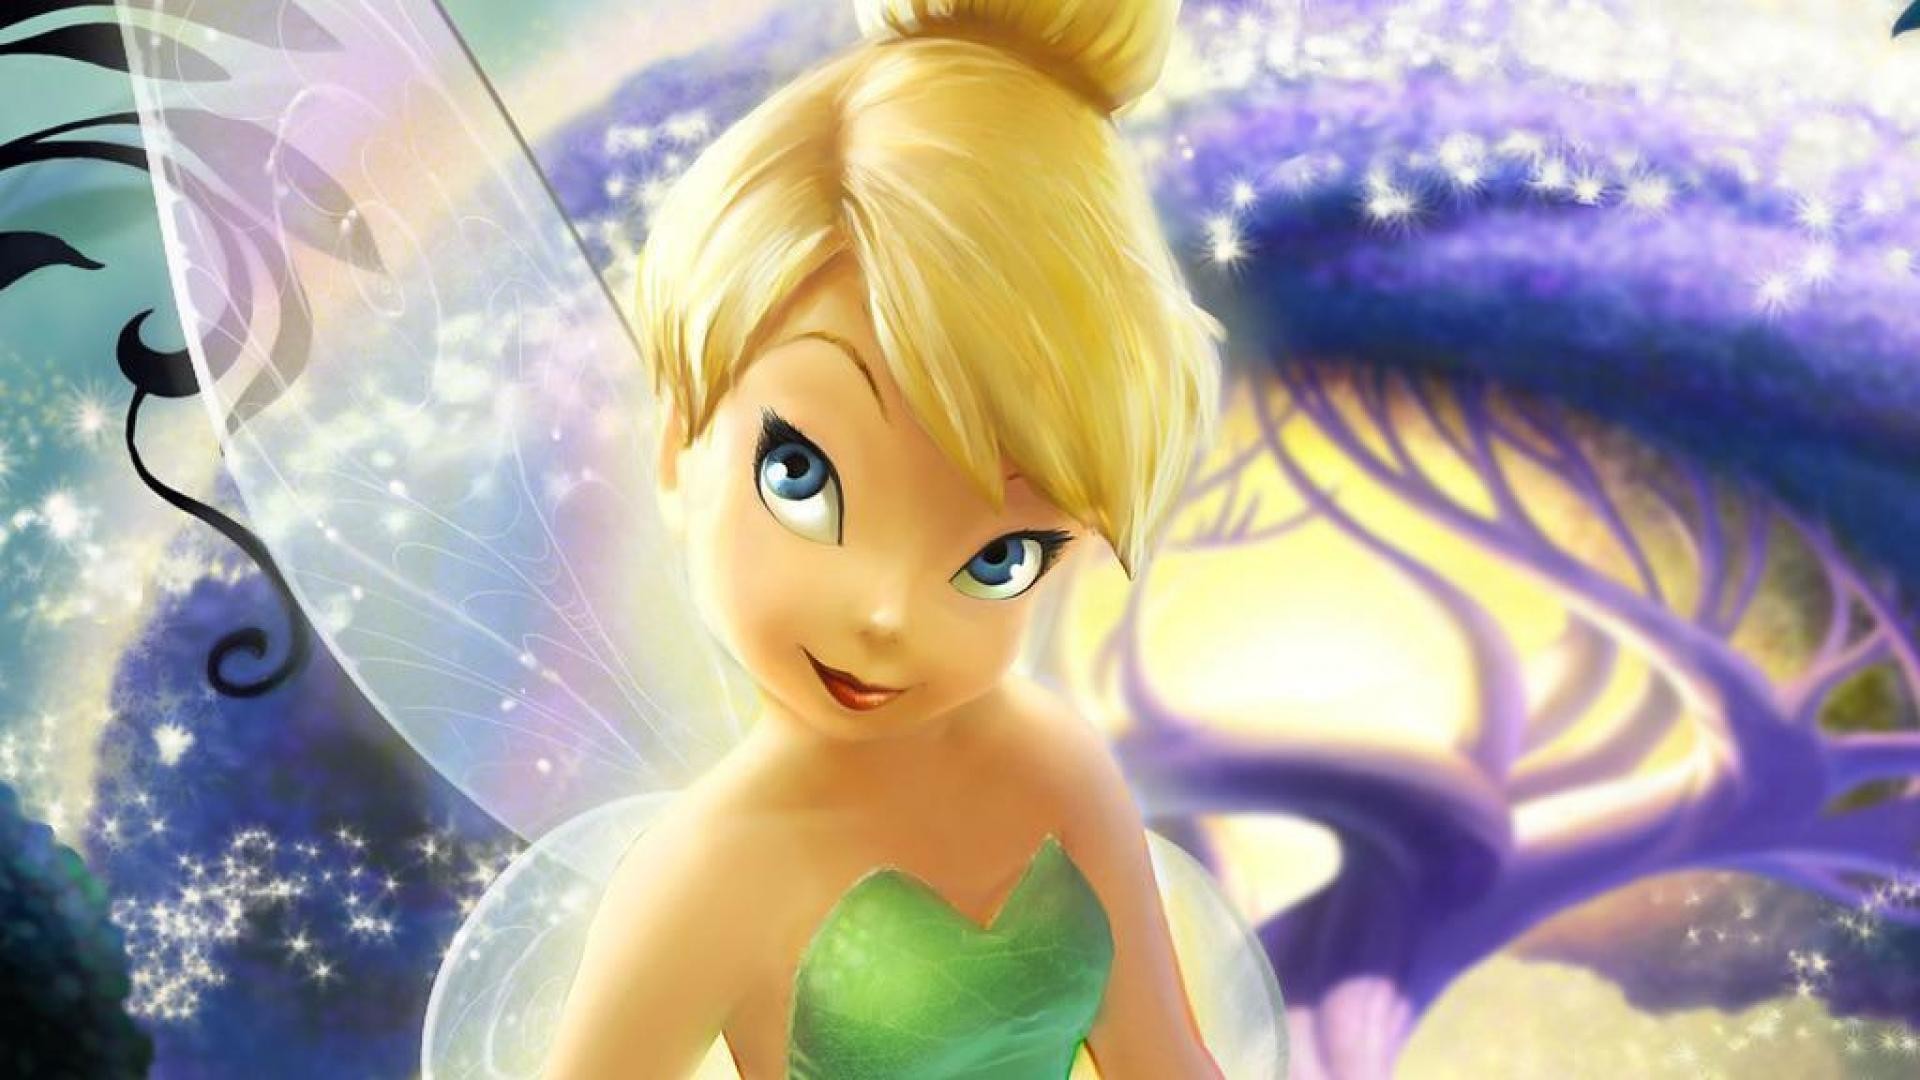 Tinker Bell Wallpapers and Screensaver (76+ images)